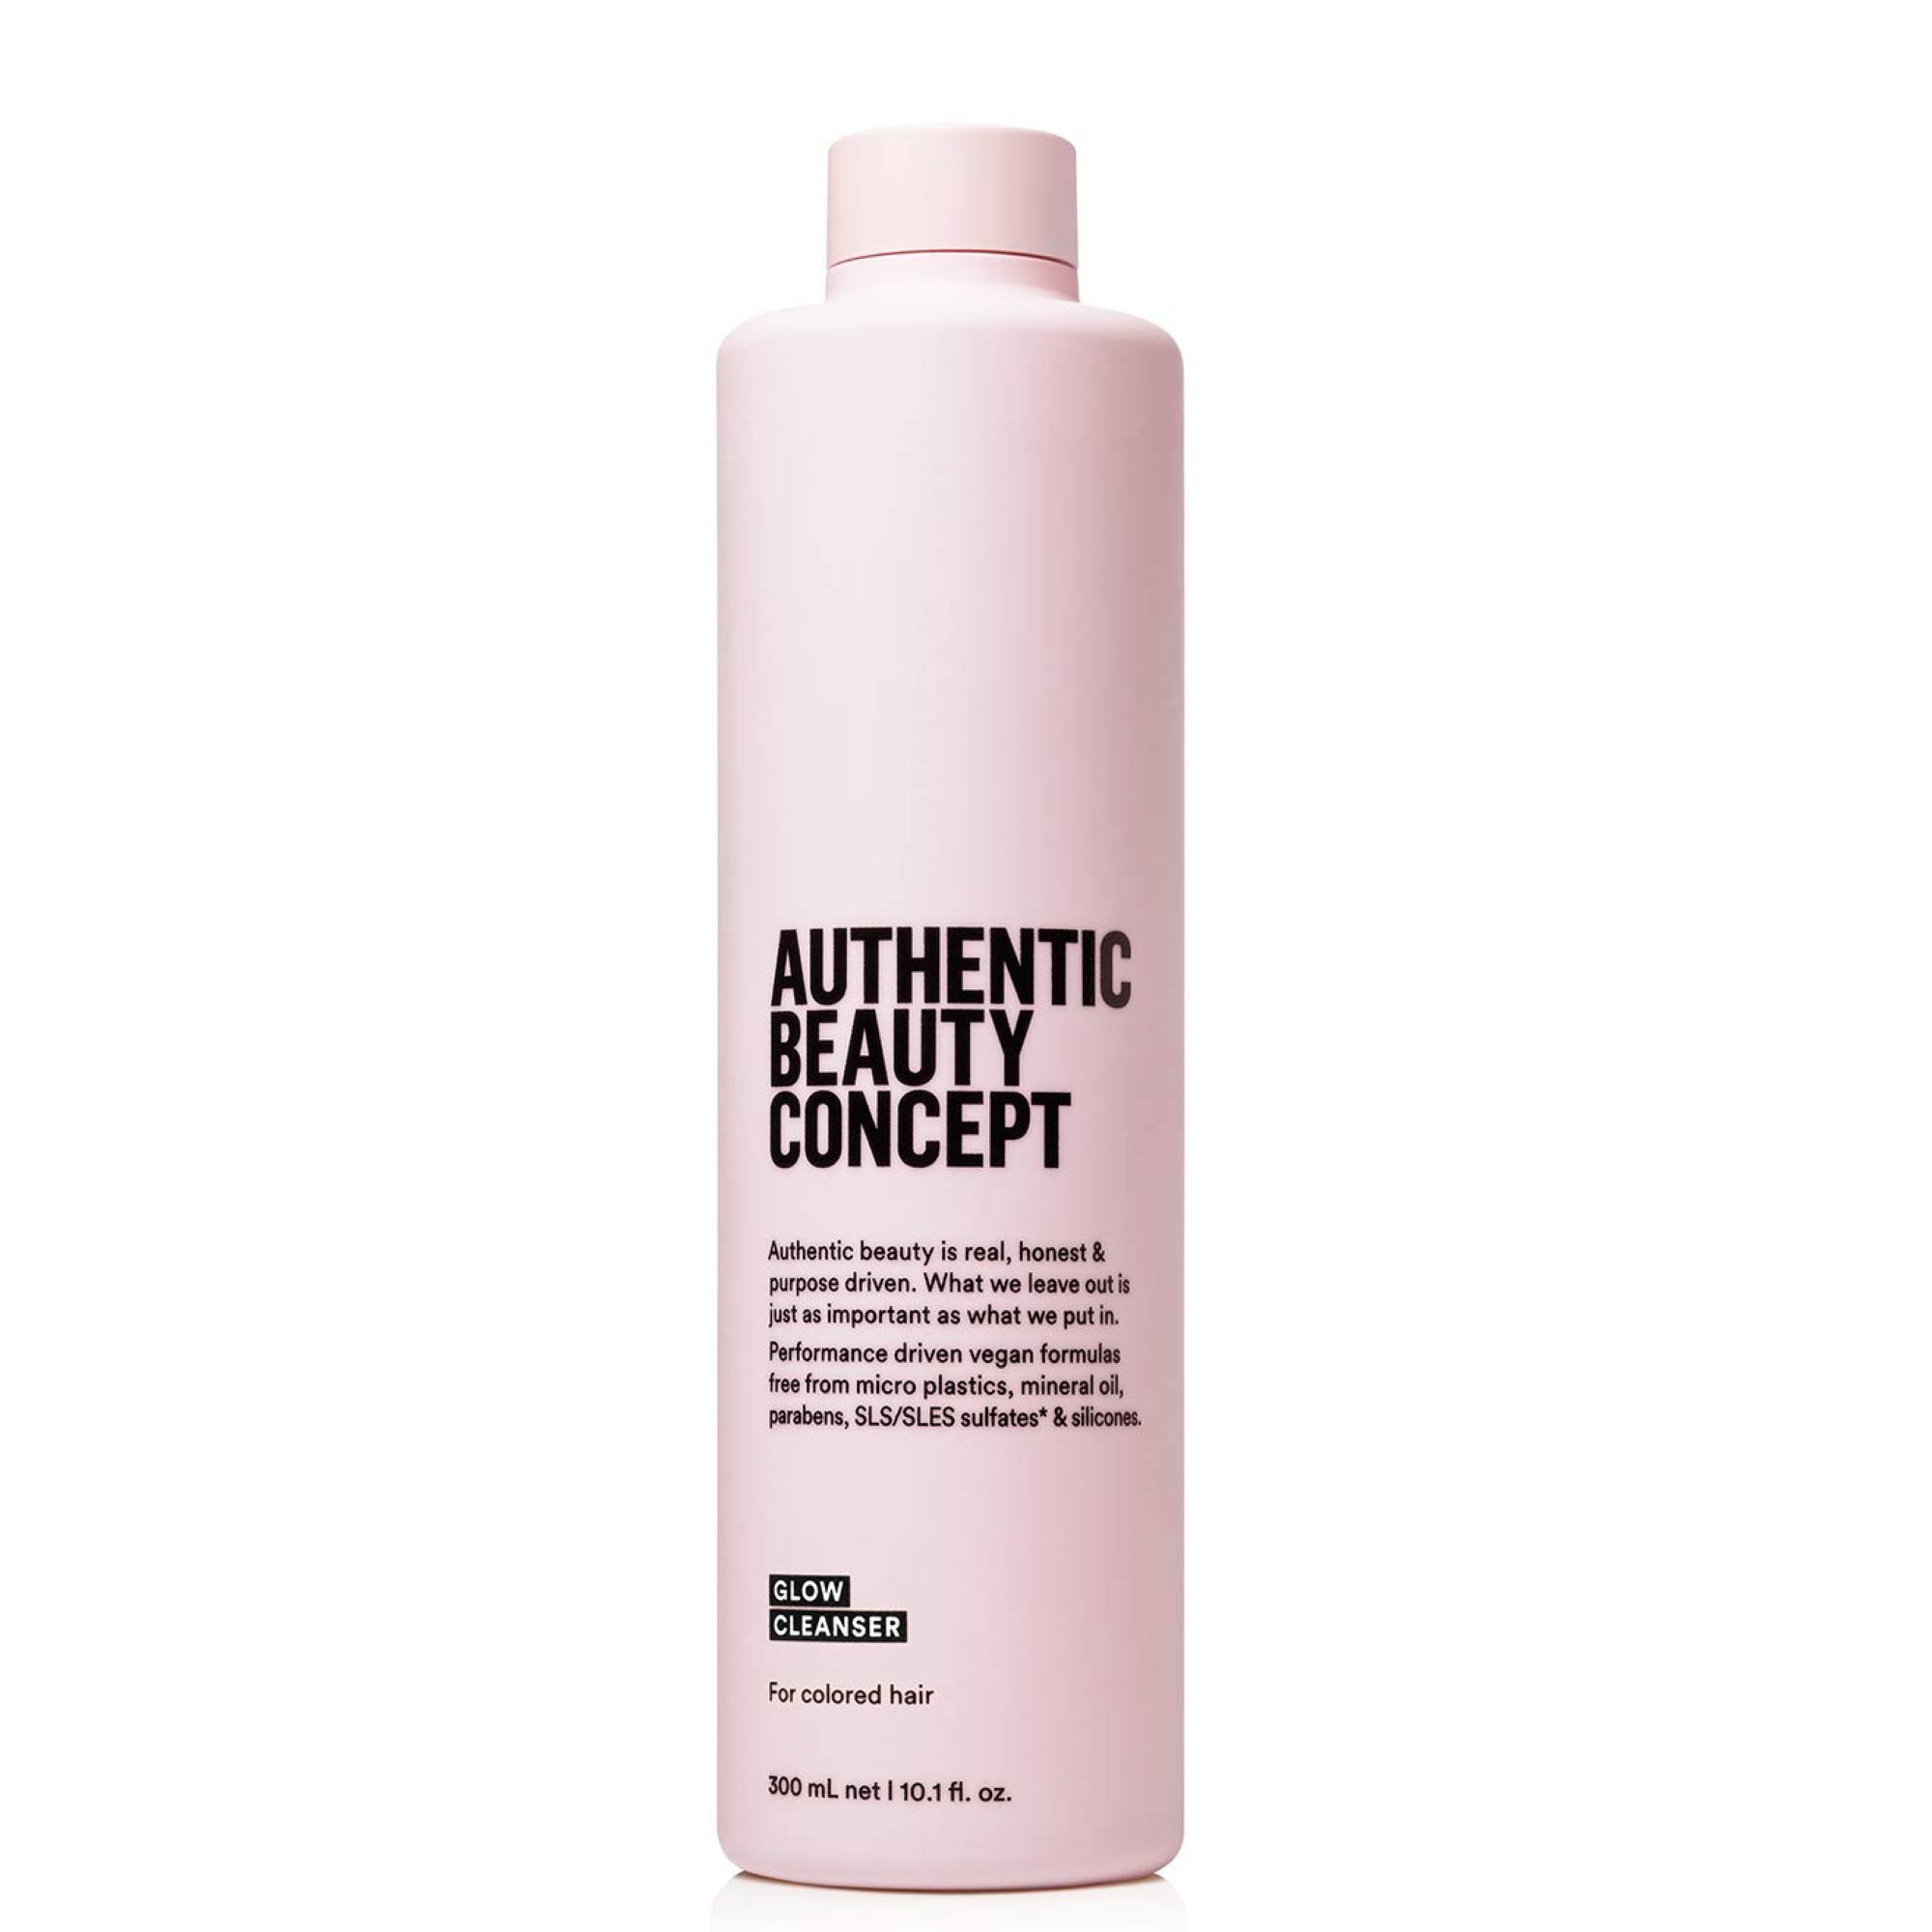 Authentic Beauty Concept Glow Cleanser / 10OZ / SWATCH